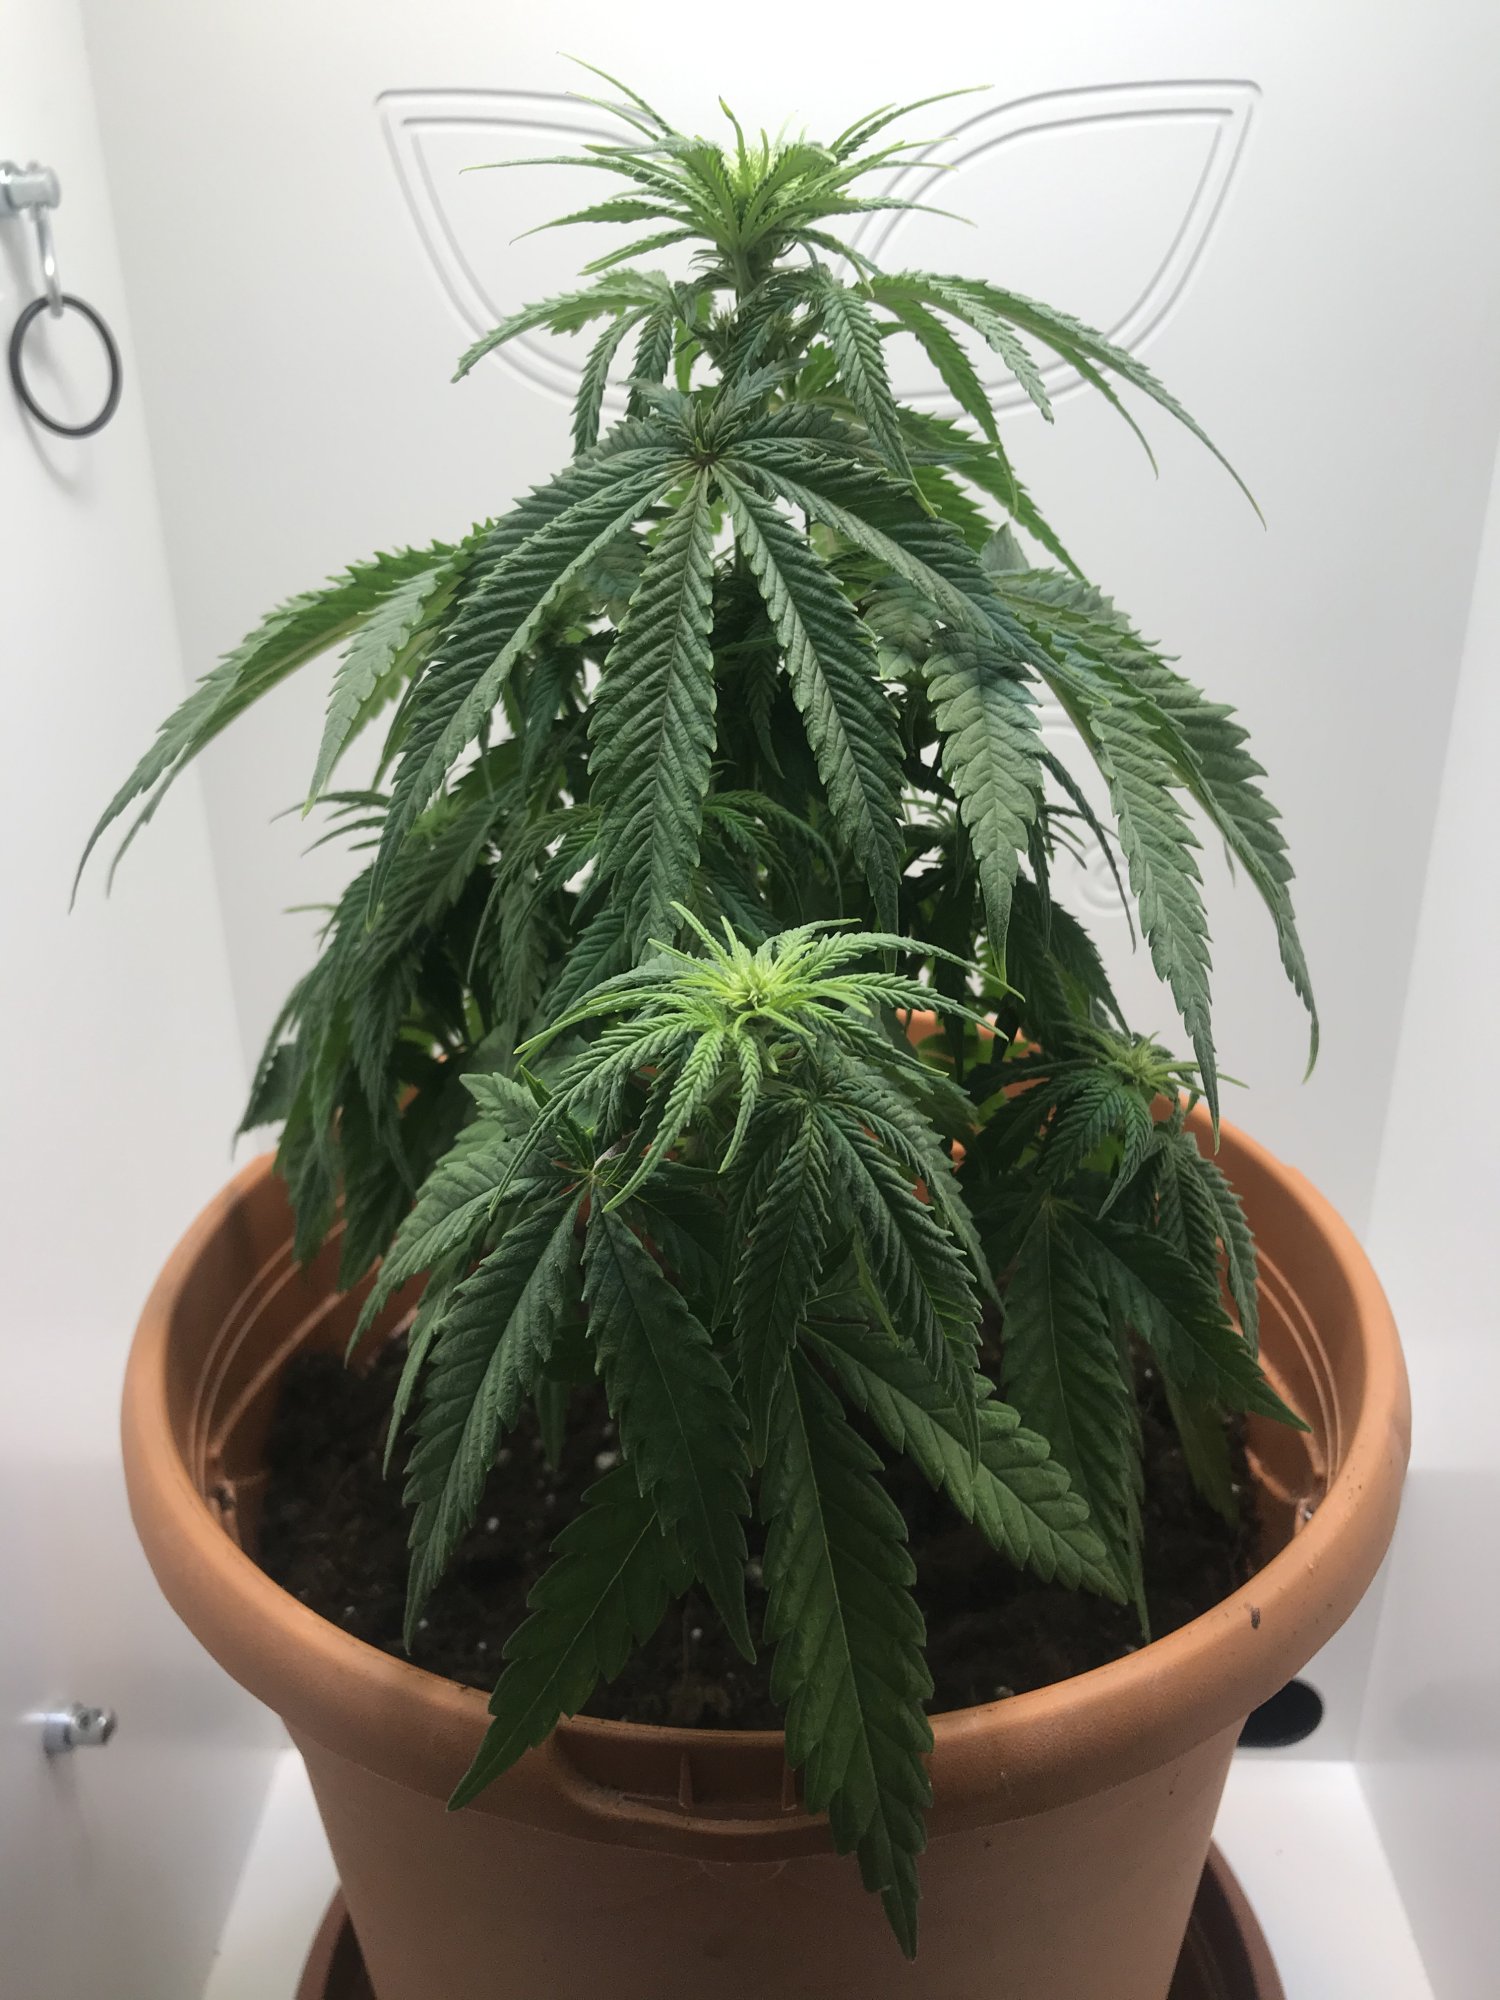 Is this a root issue nute deficiency or something else 2